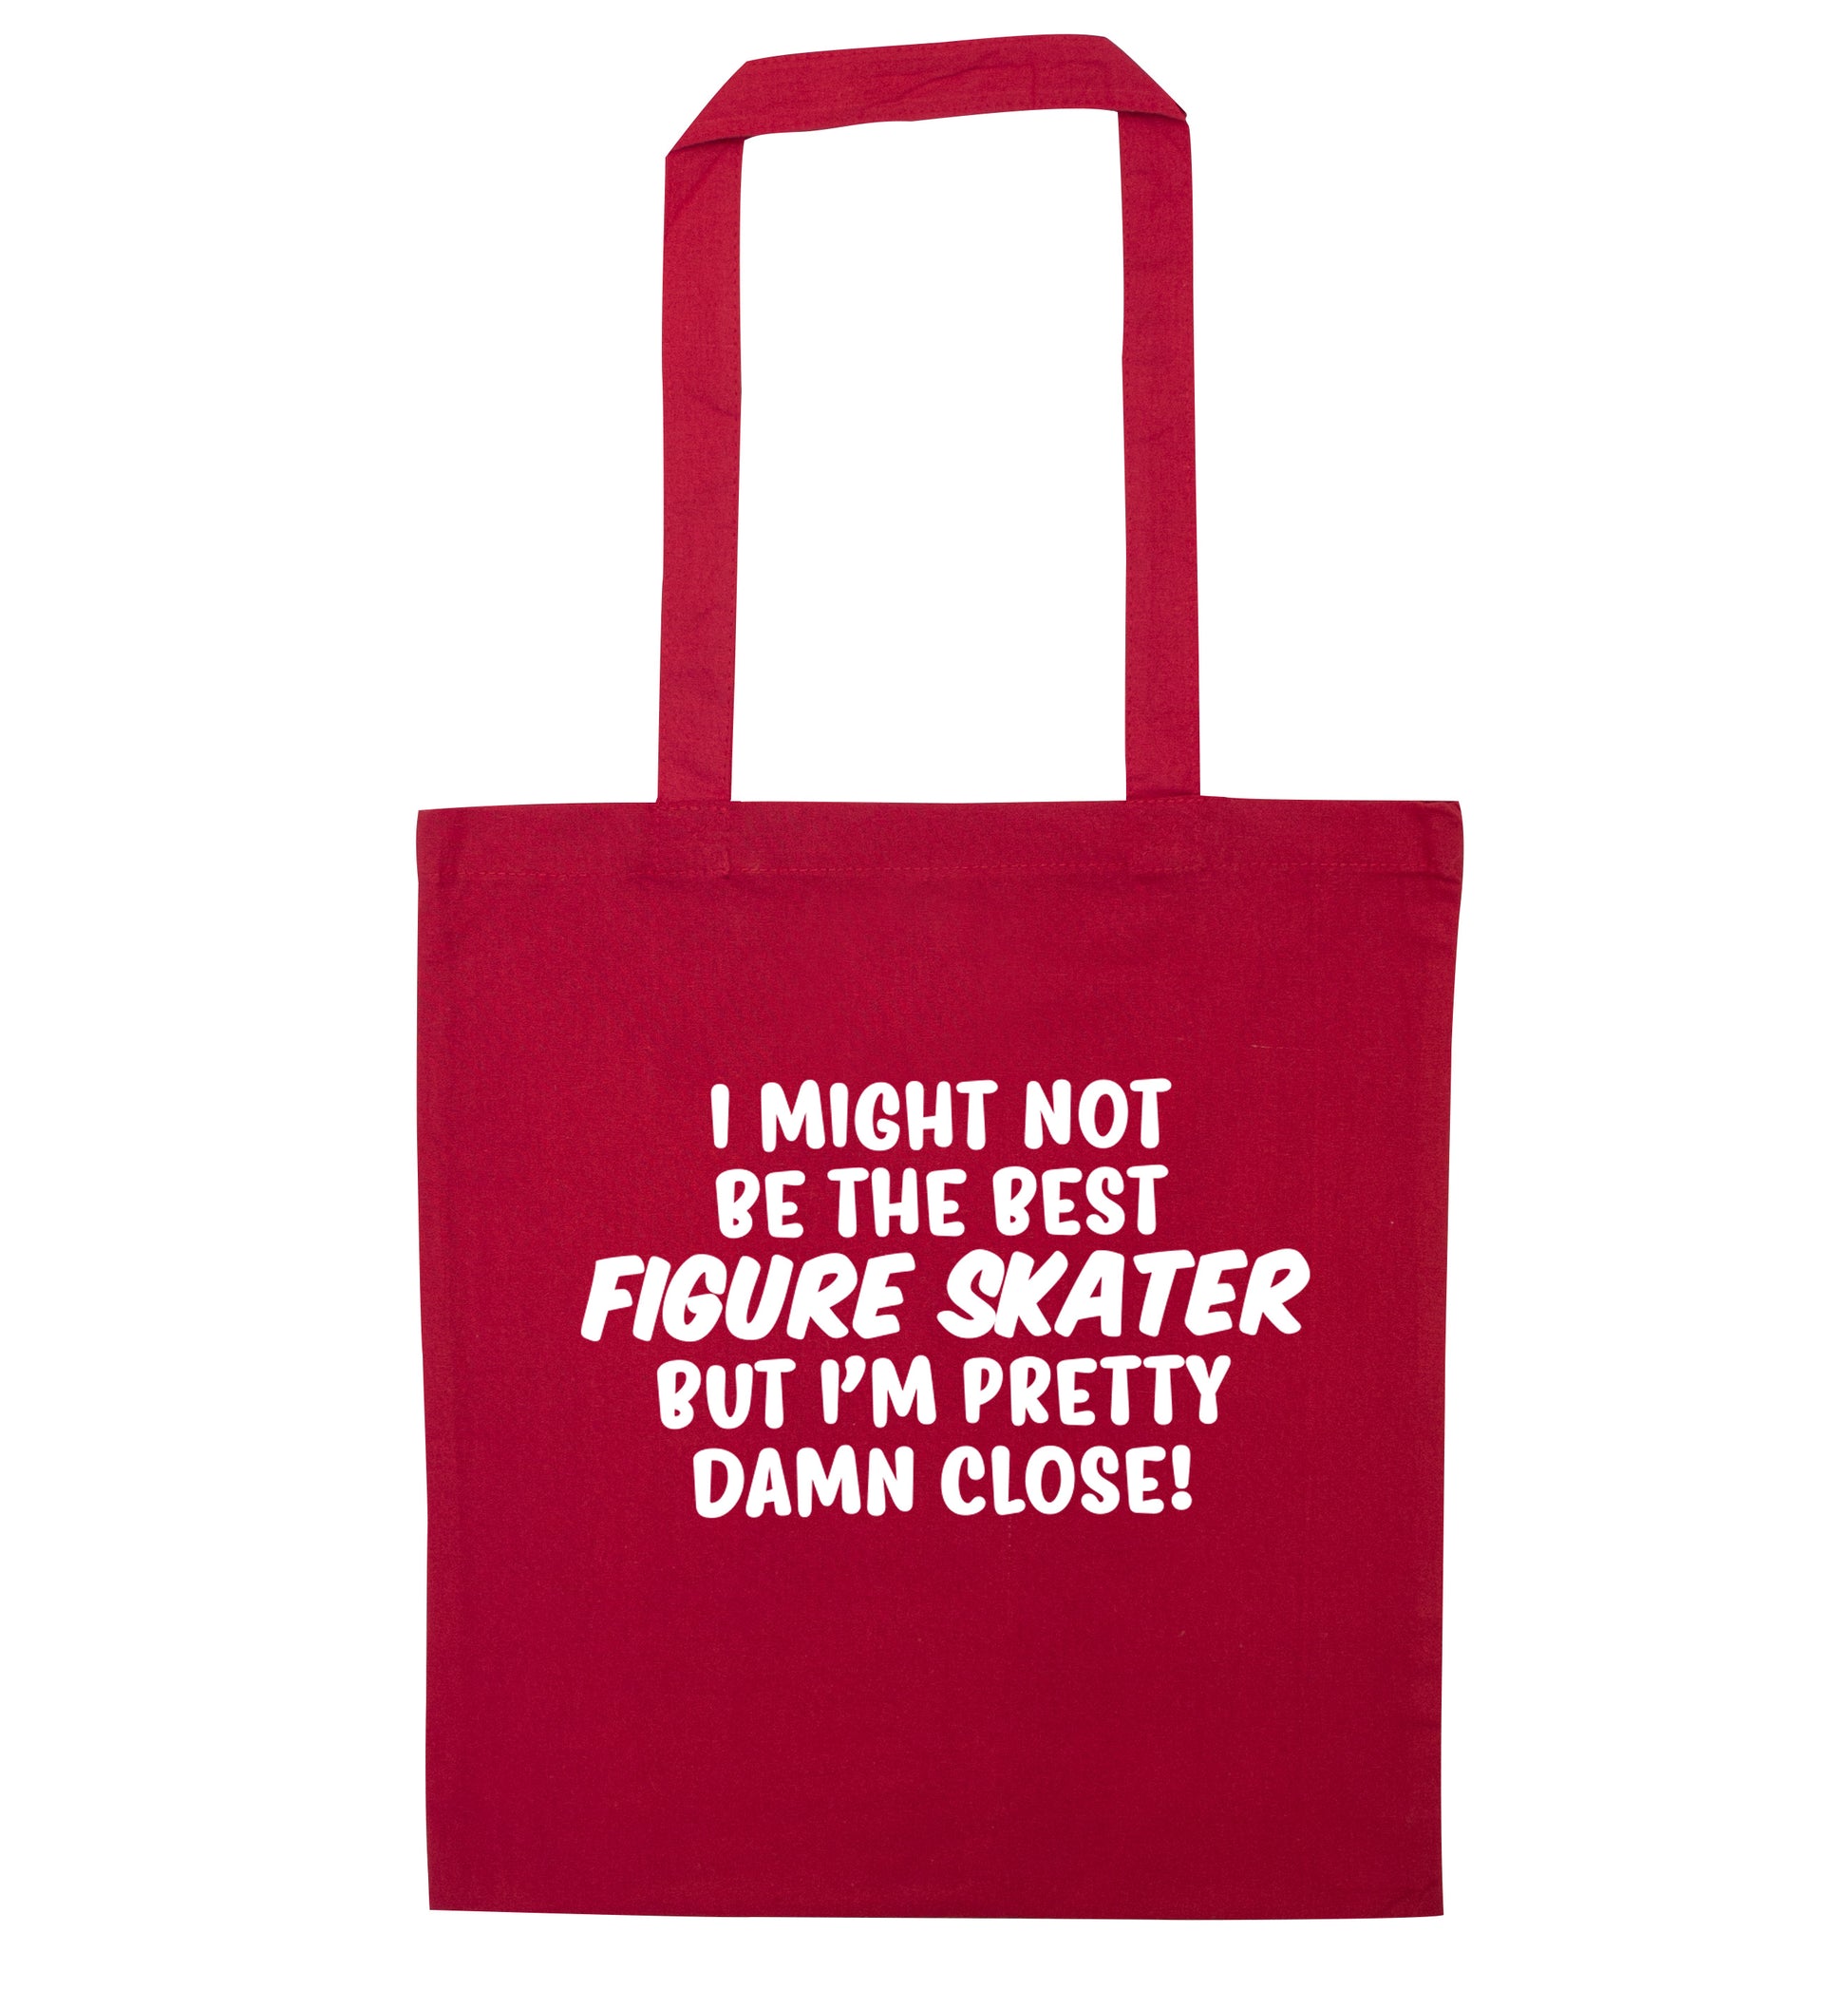 I might not be the best figure skater but I'm pretty damn close! red tote bag